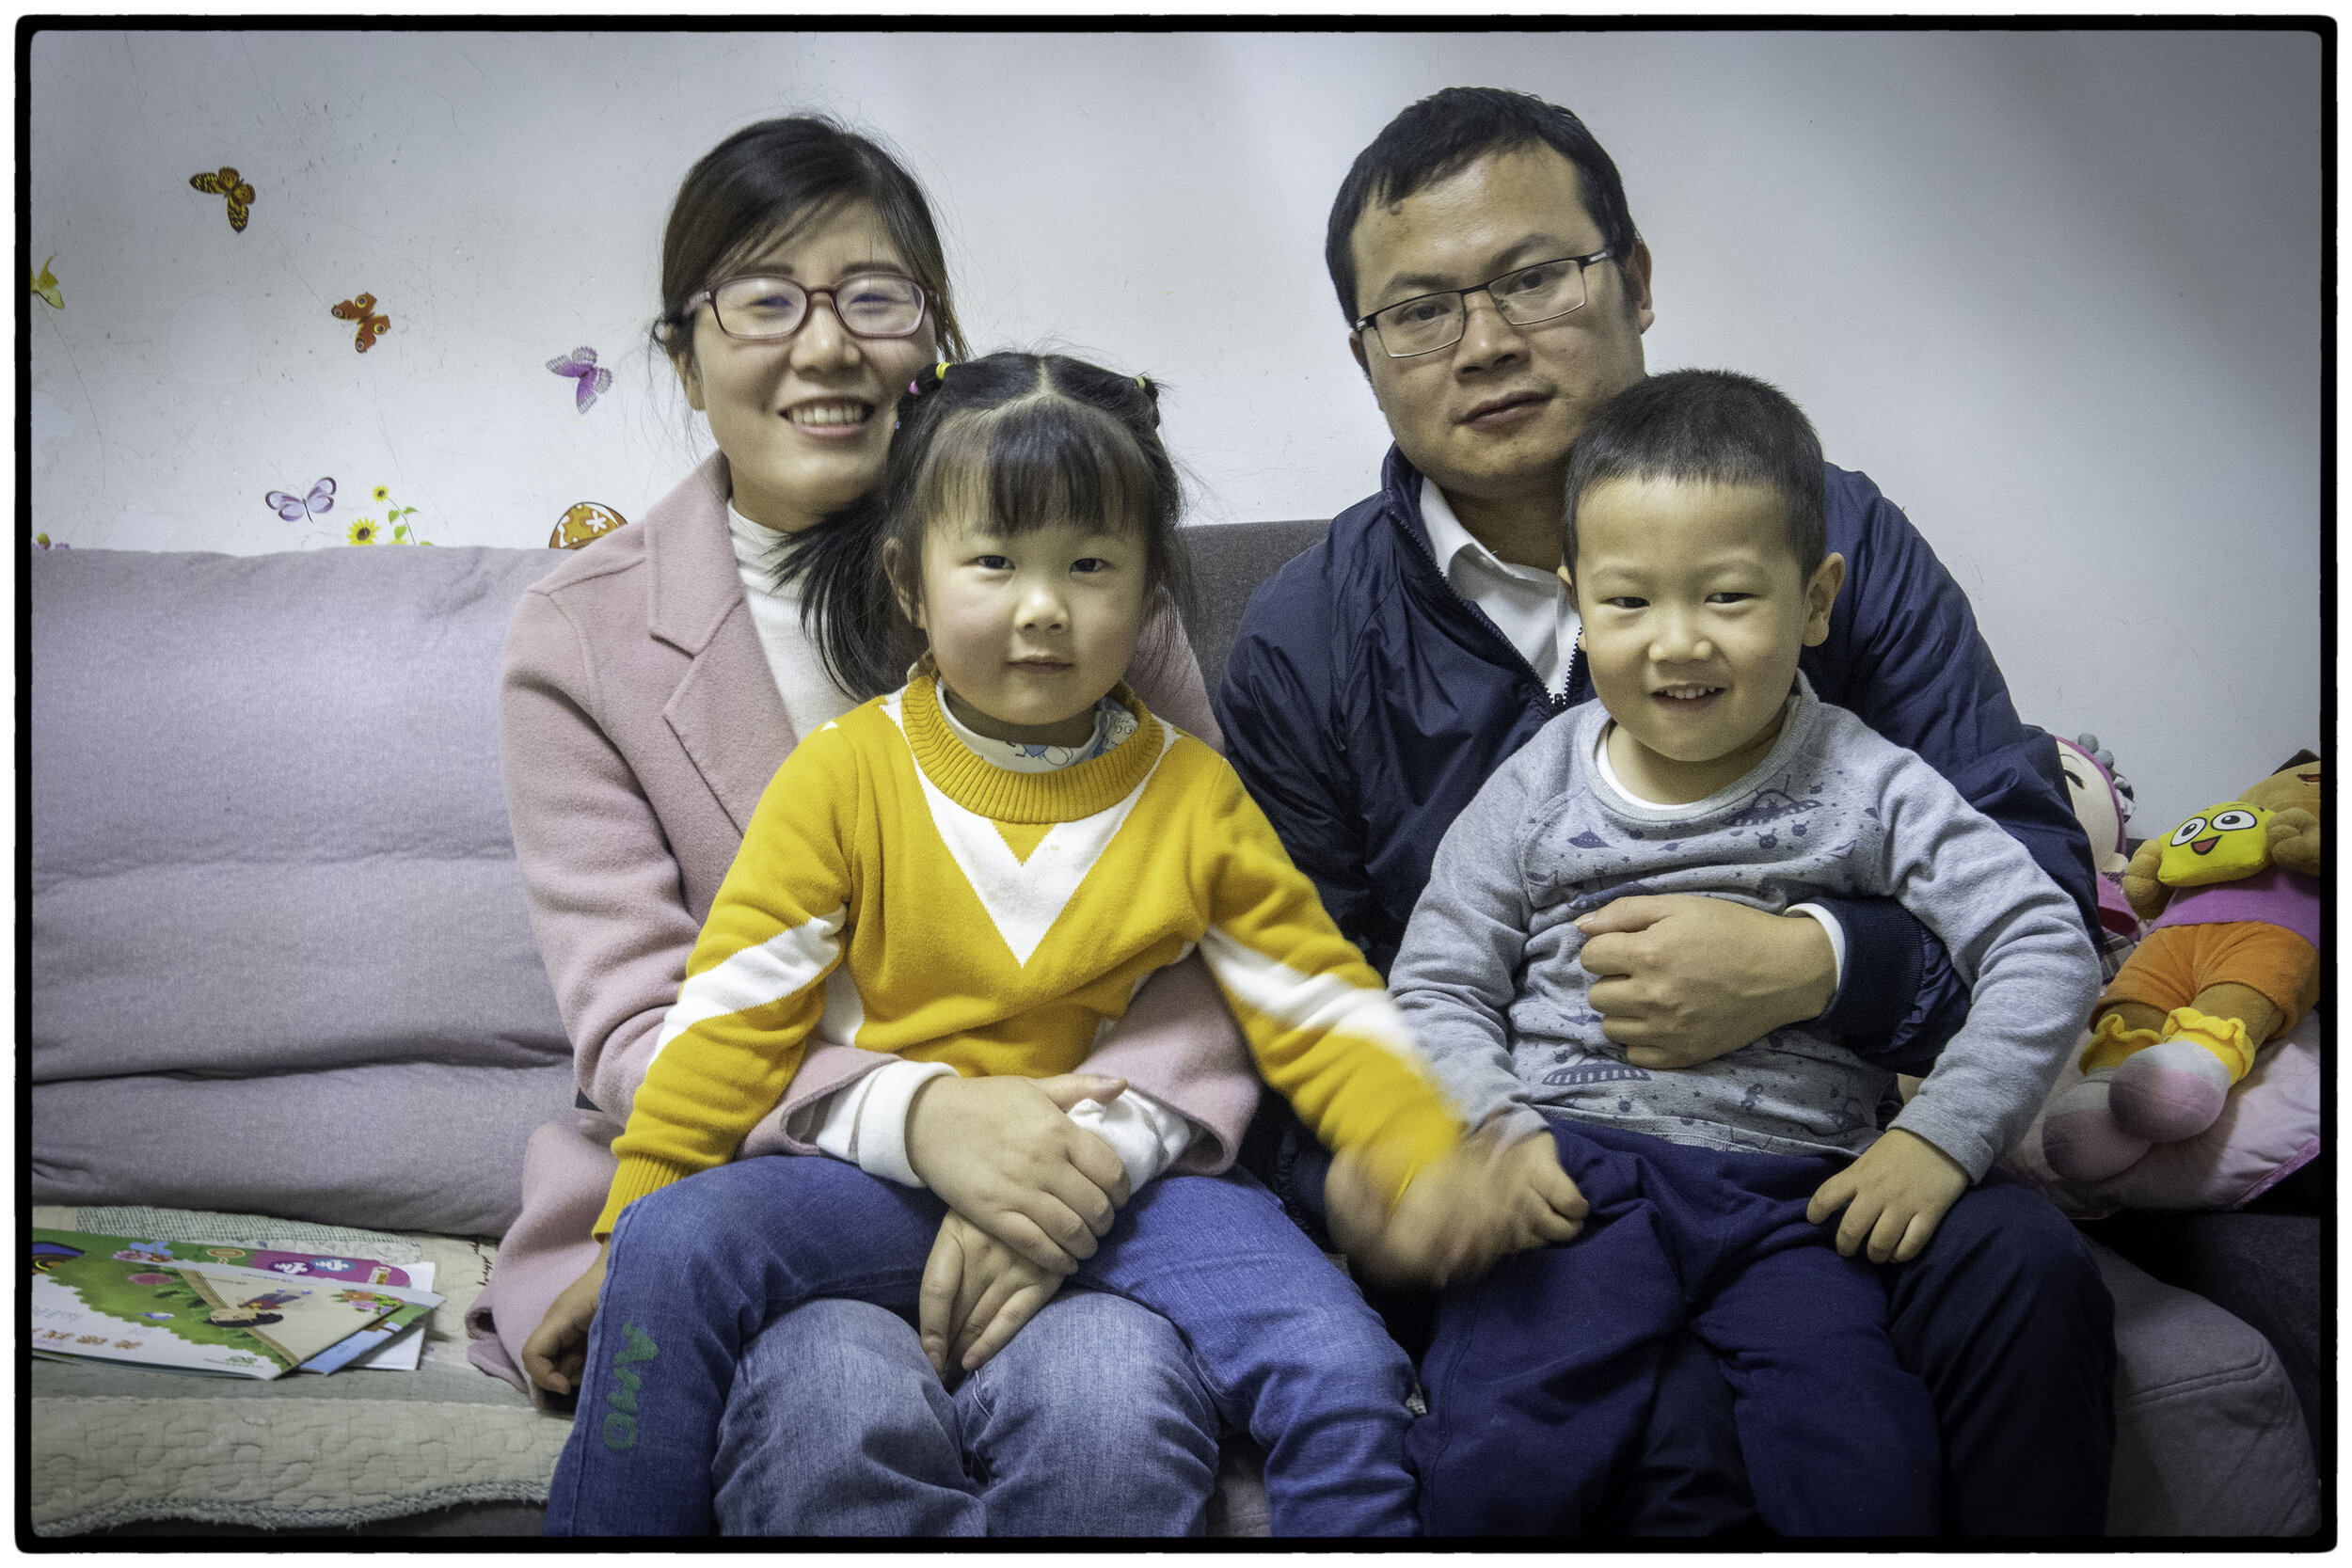 Zhong, his wife, and their twins